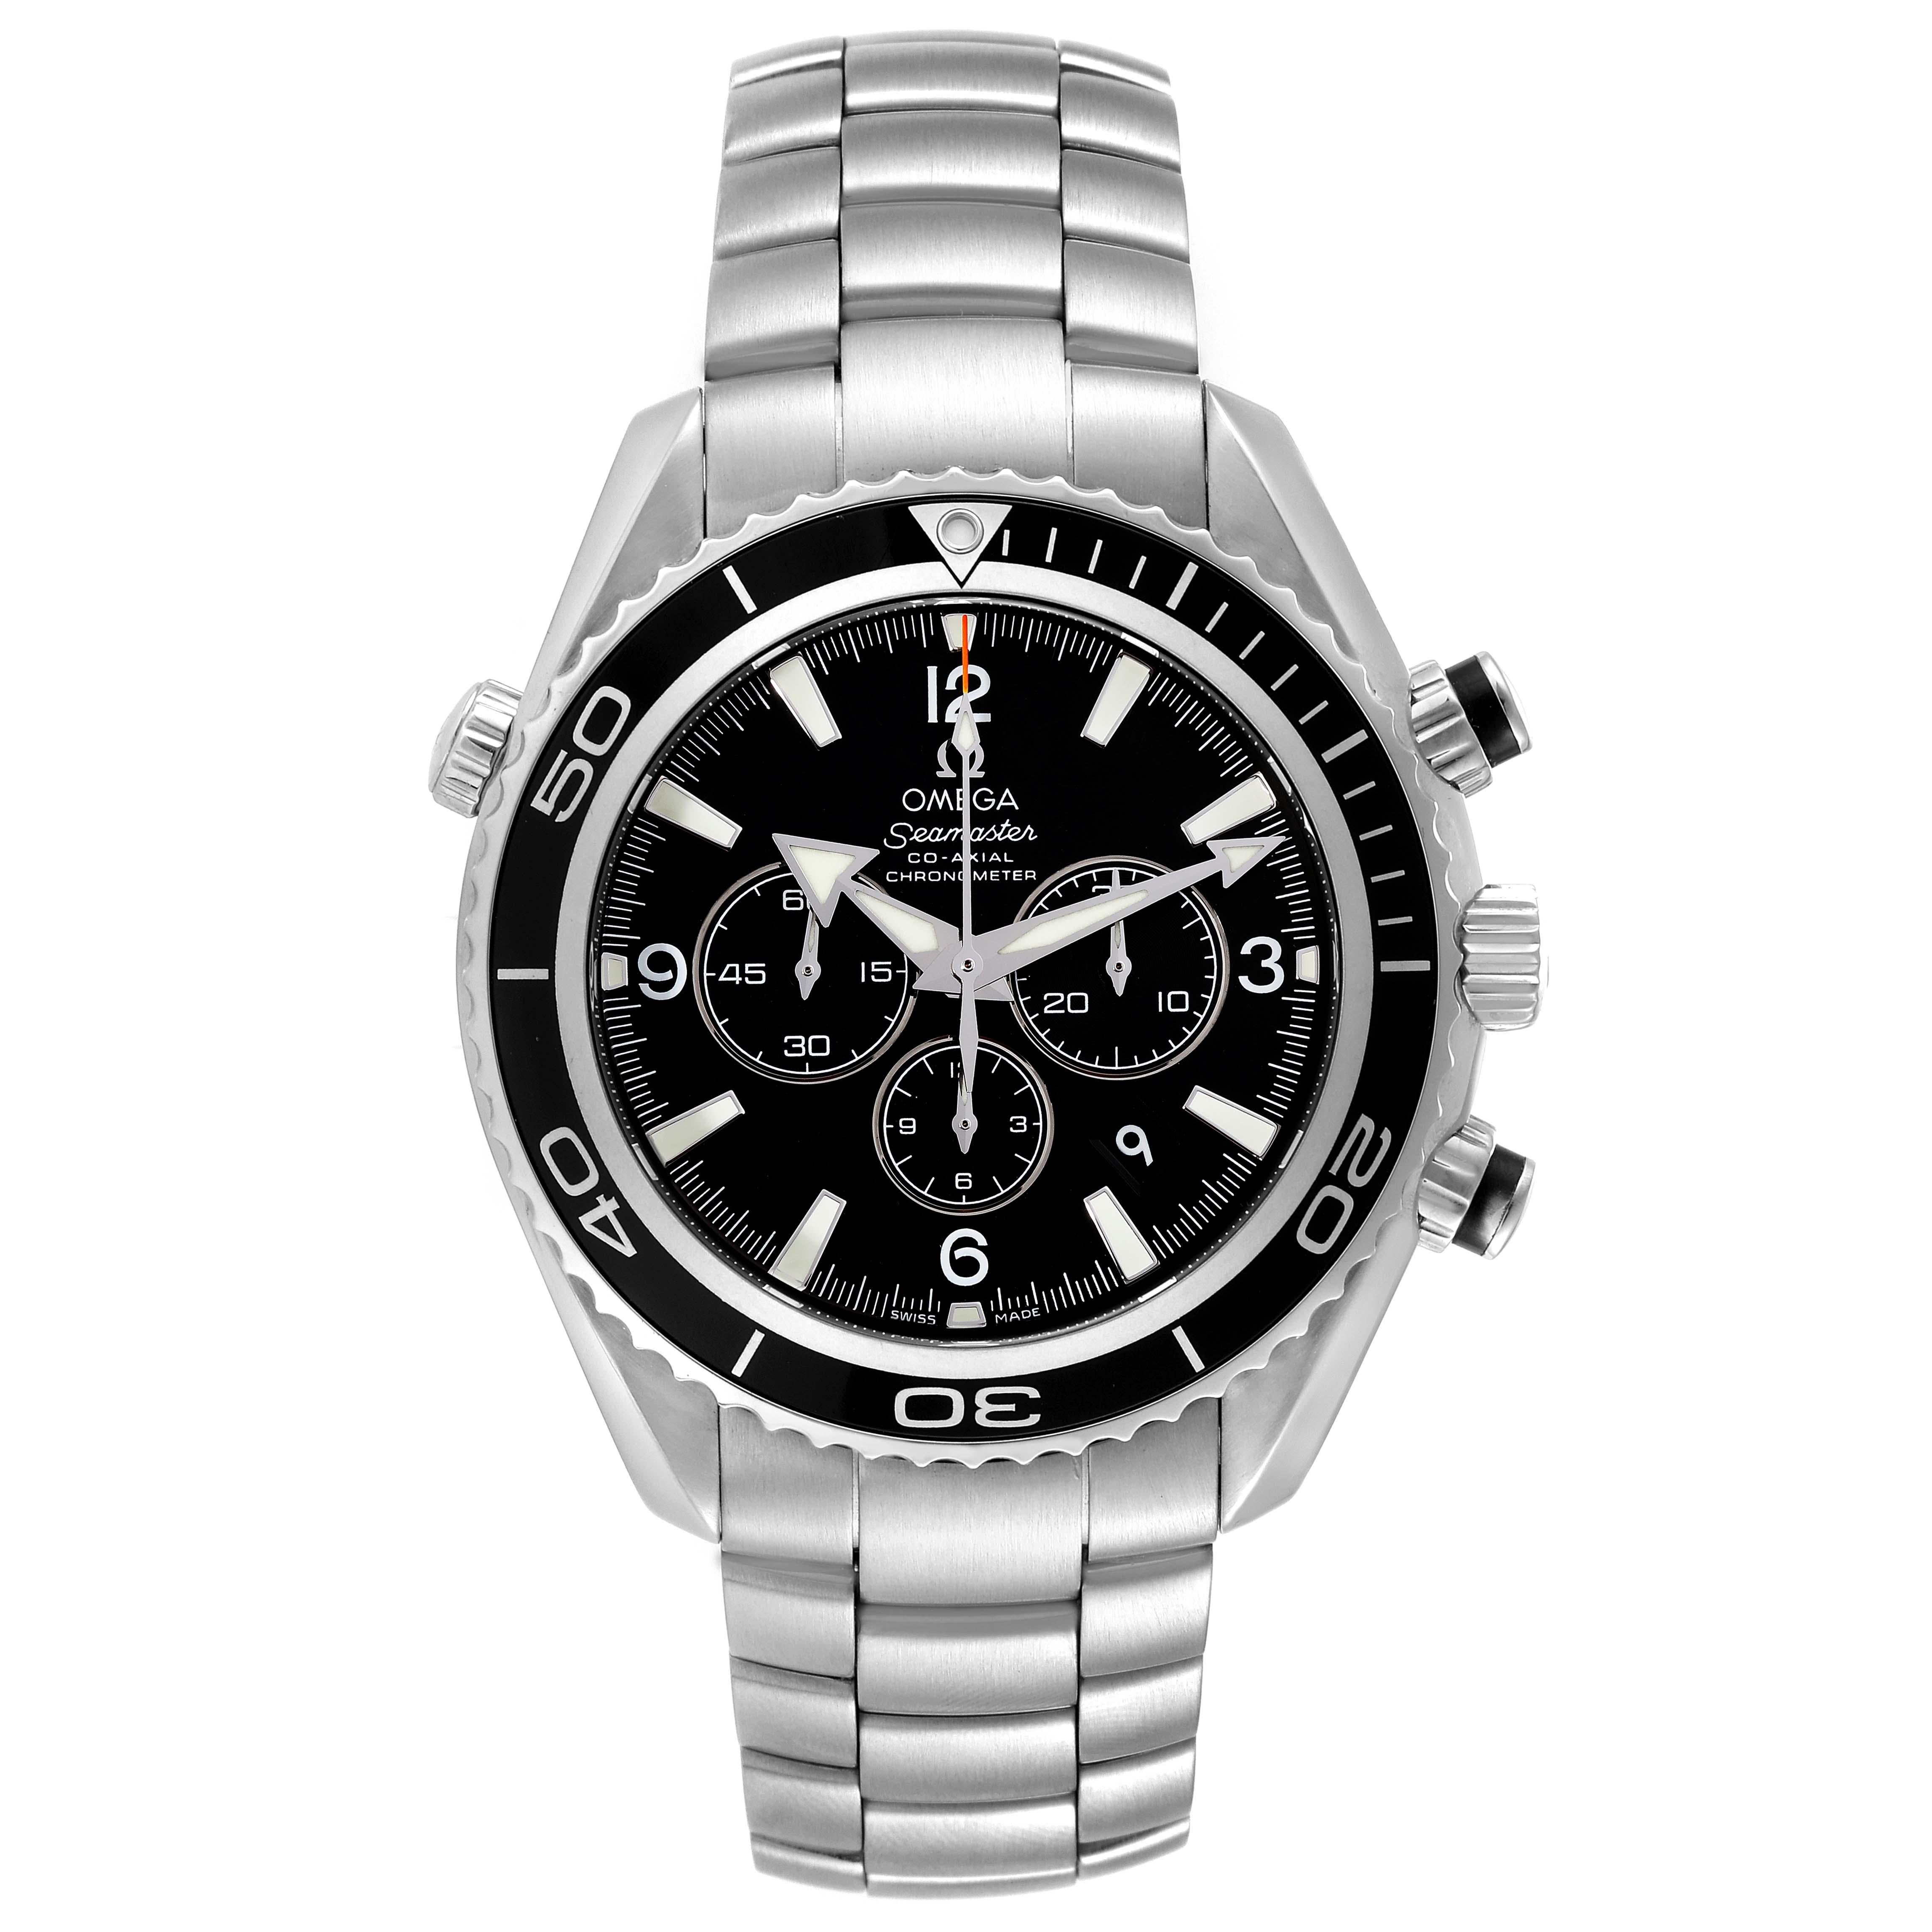 Omega Seamaster Planet Ocean Chronograph Steel Mens Watch 2210.50.00 Box Card. Automatic self-winding chronograph - chronometer movement. Stainless steel round case 45.0 mm in diameter. Helium Escapement Valve at the 10 o'clock position. Black